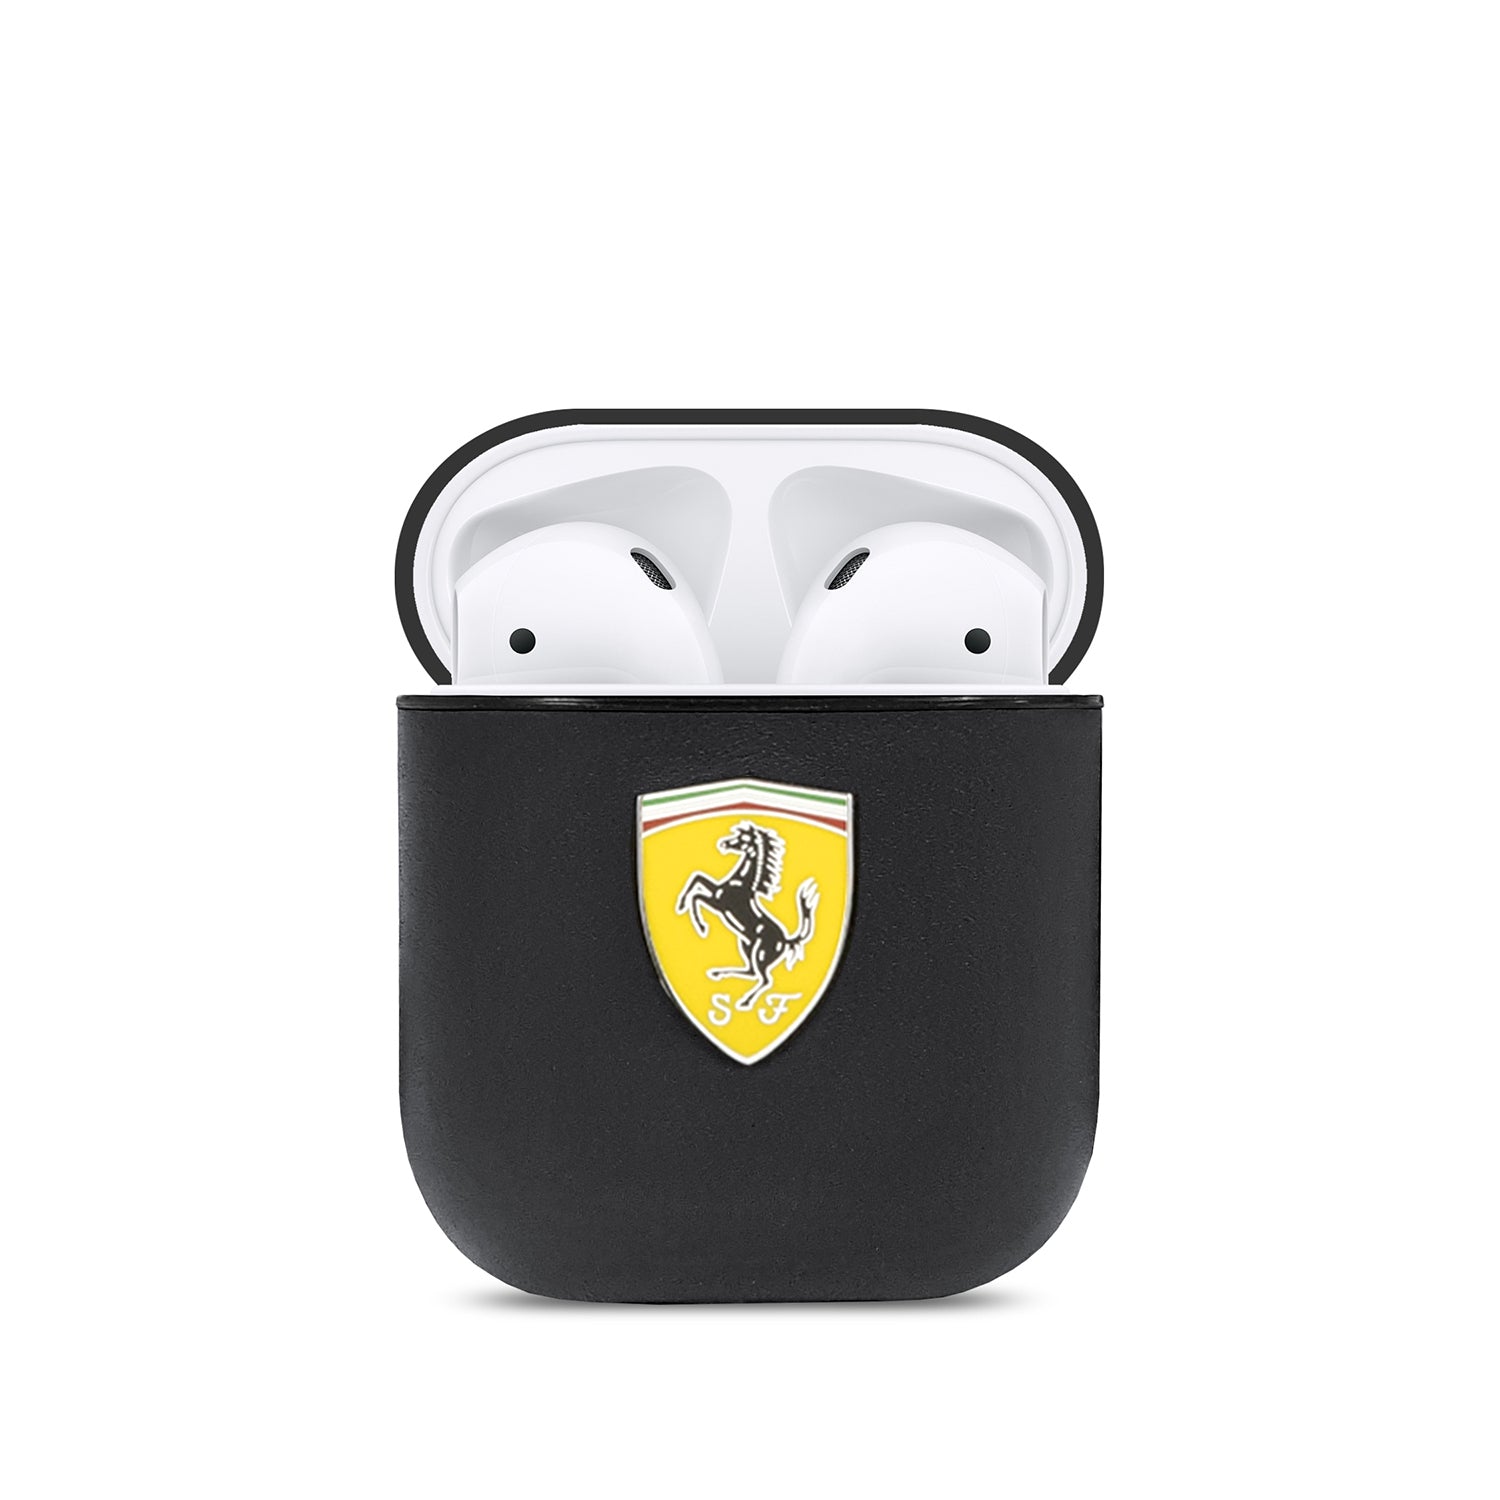 Fan Brander Black Leatherette Apple AirPod case with Colorado Buffaloes  Primary Logo